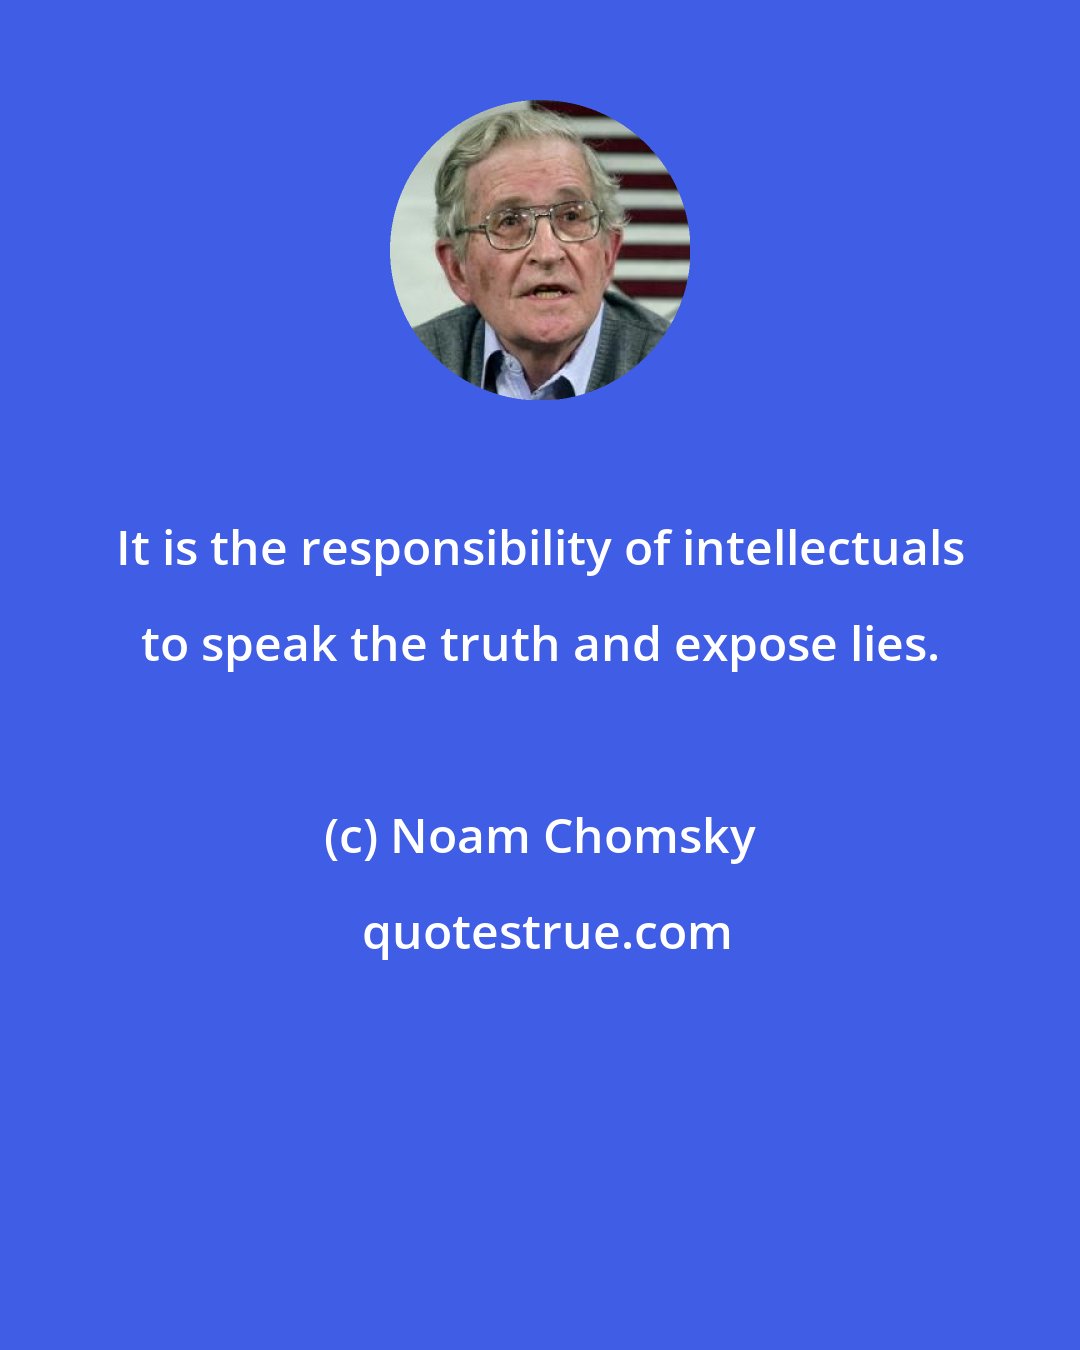 Noam Chomsky: It is the responsibility of intellectuals to speak the truth and expose lies.